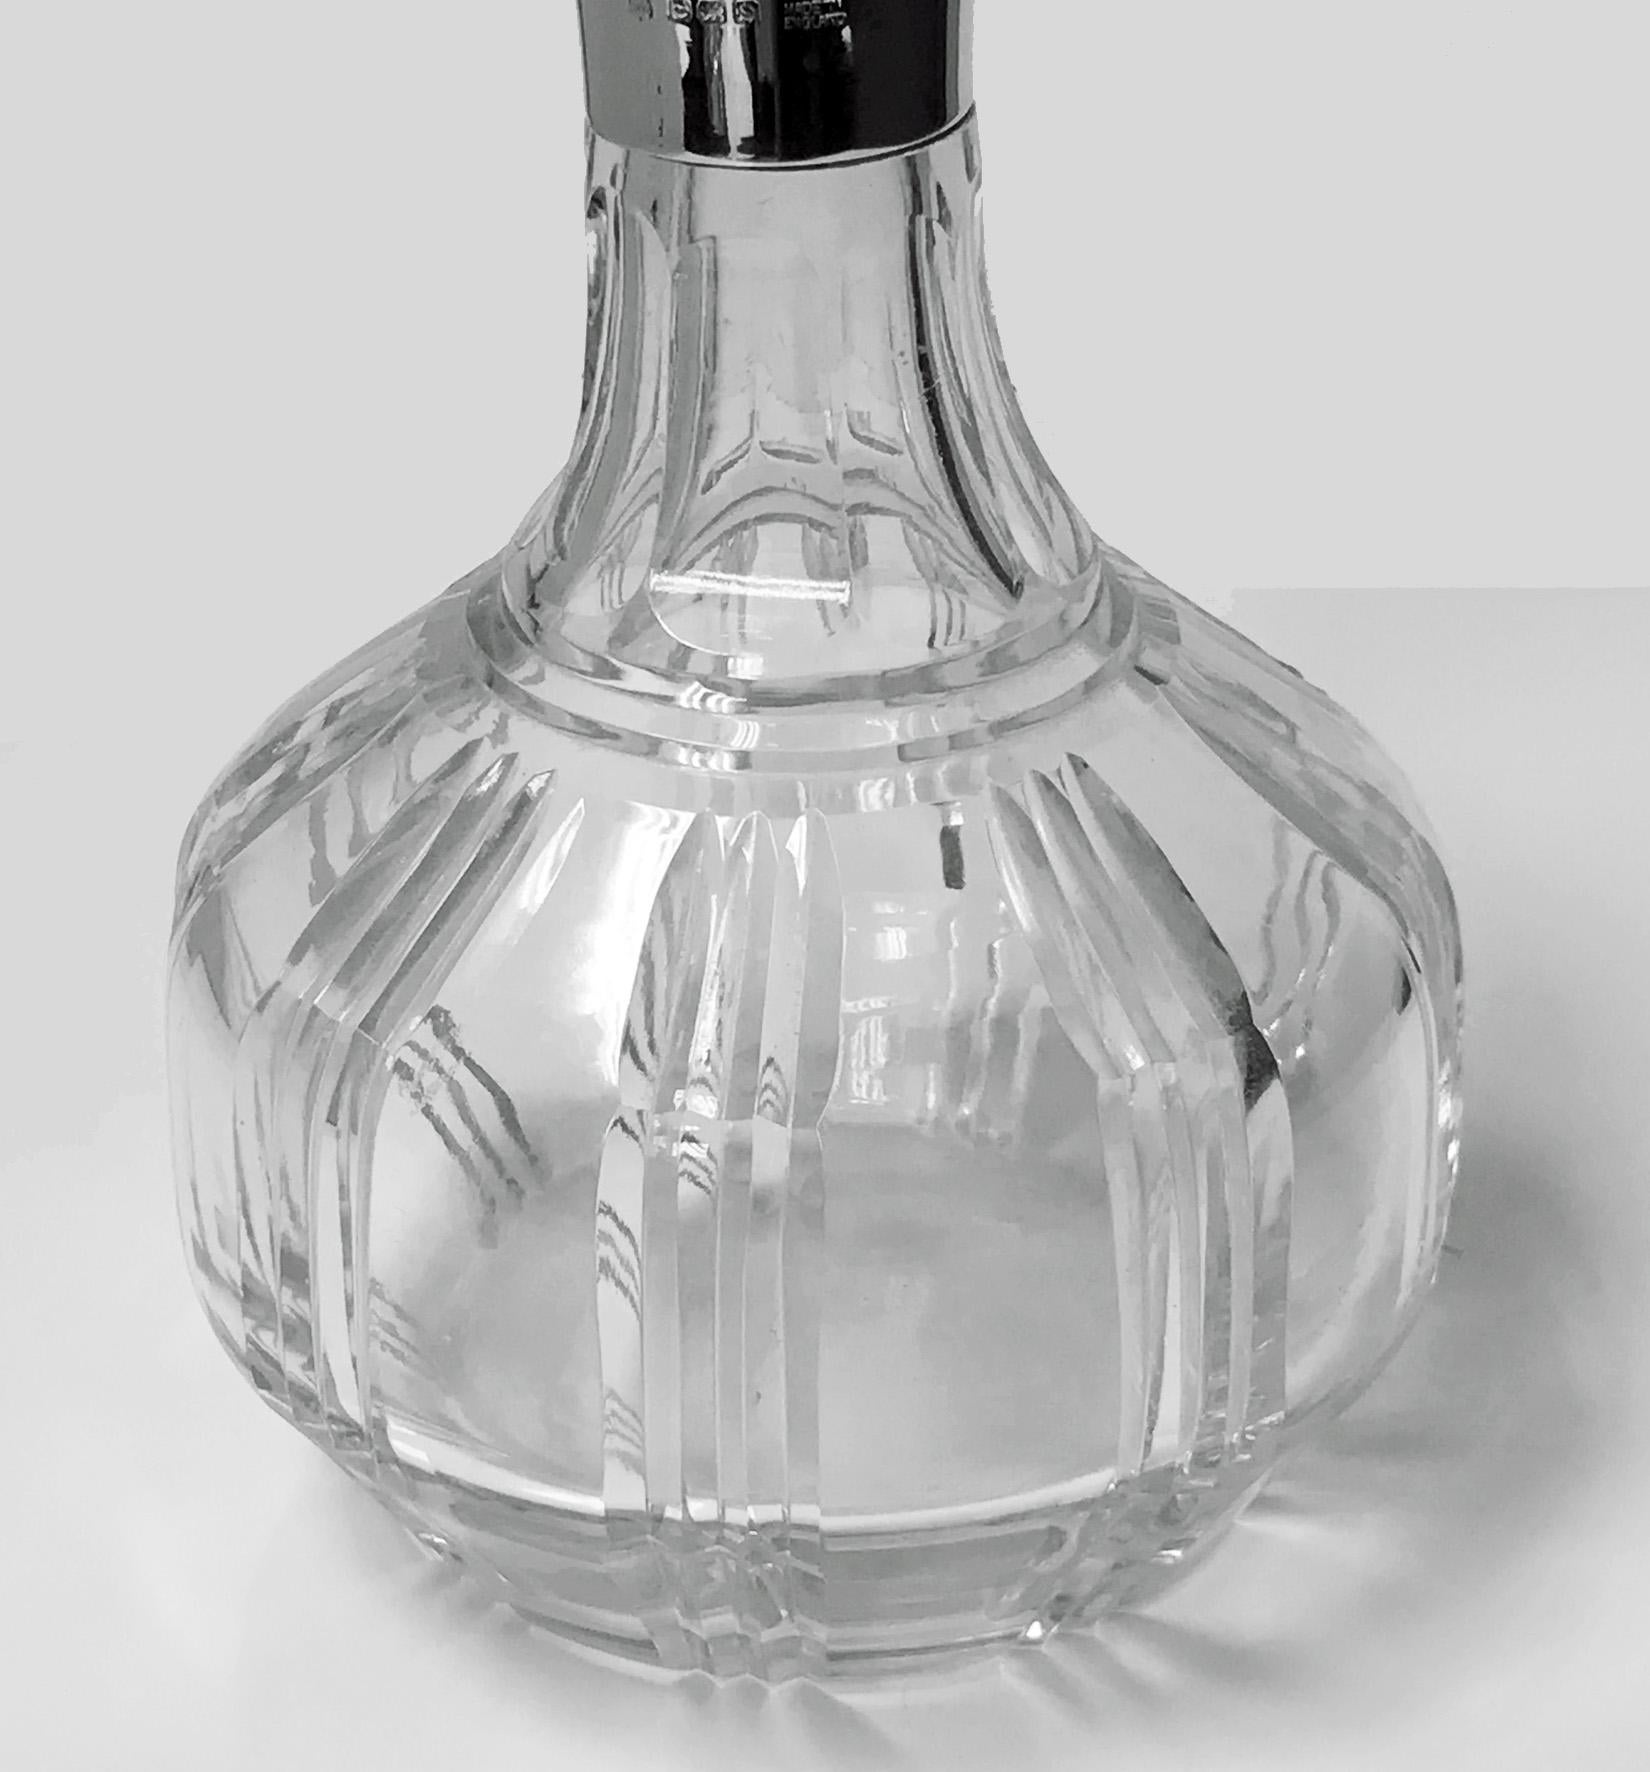 Sterling silver and handcut crystal Decanter Birmingham 1942, Barker Bros Silver Co. The decanter of bulbous shape, plain and inter spaced with handcut fluted ribbed sections surrounds, silver collar with lip, and original fluted stopper. Made by